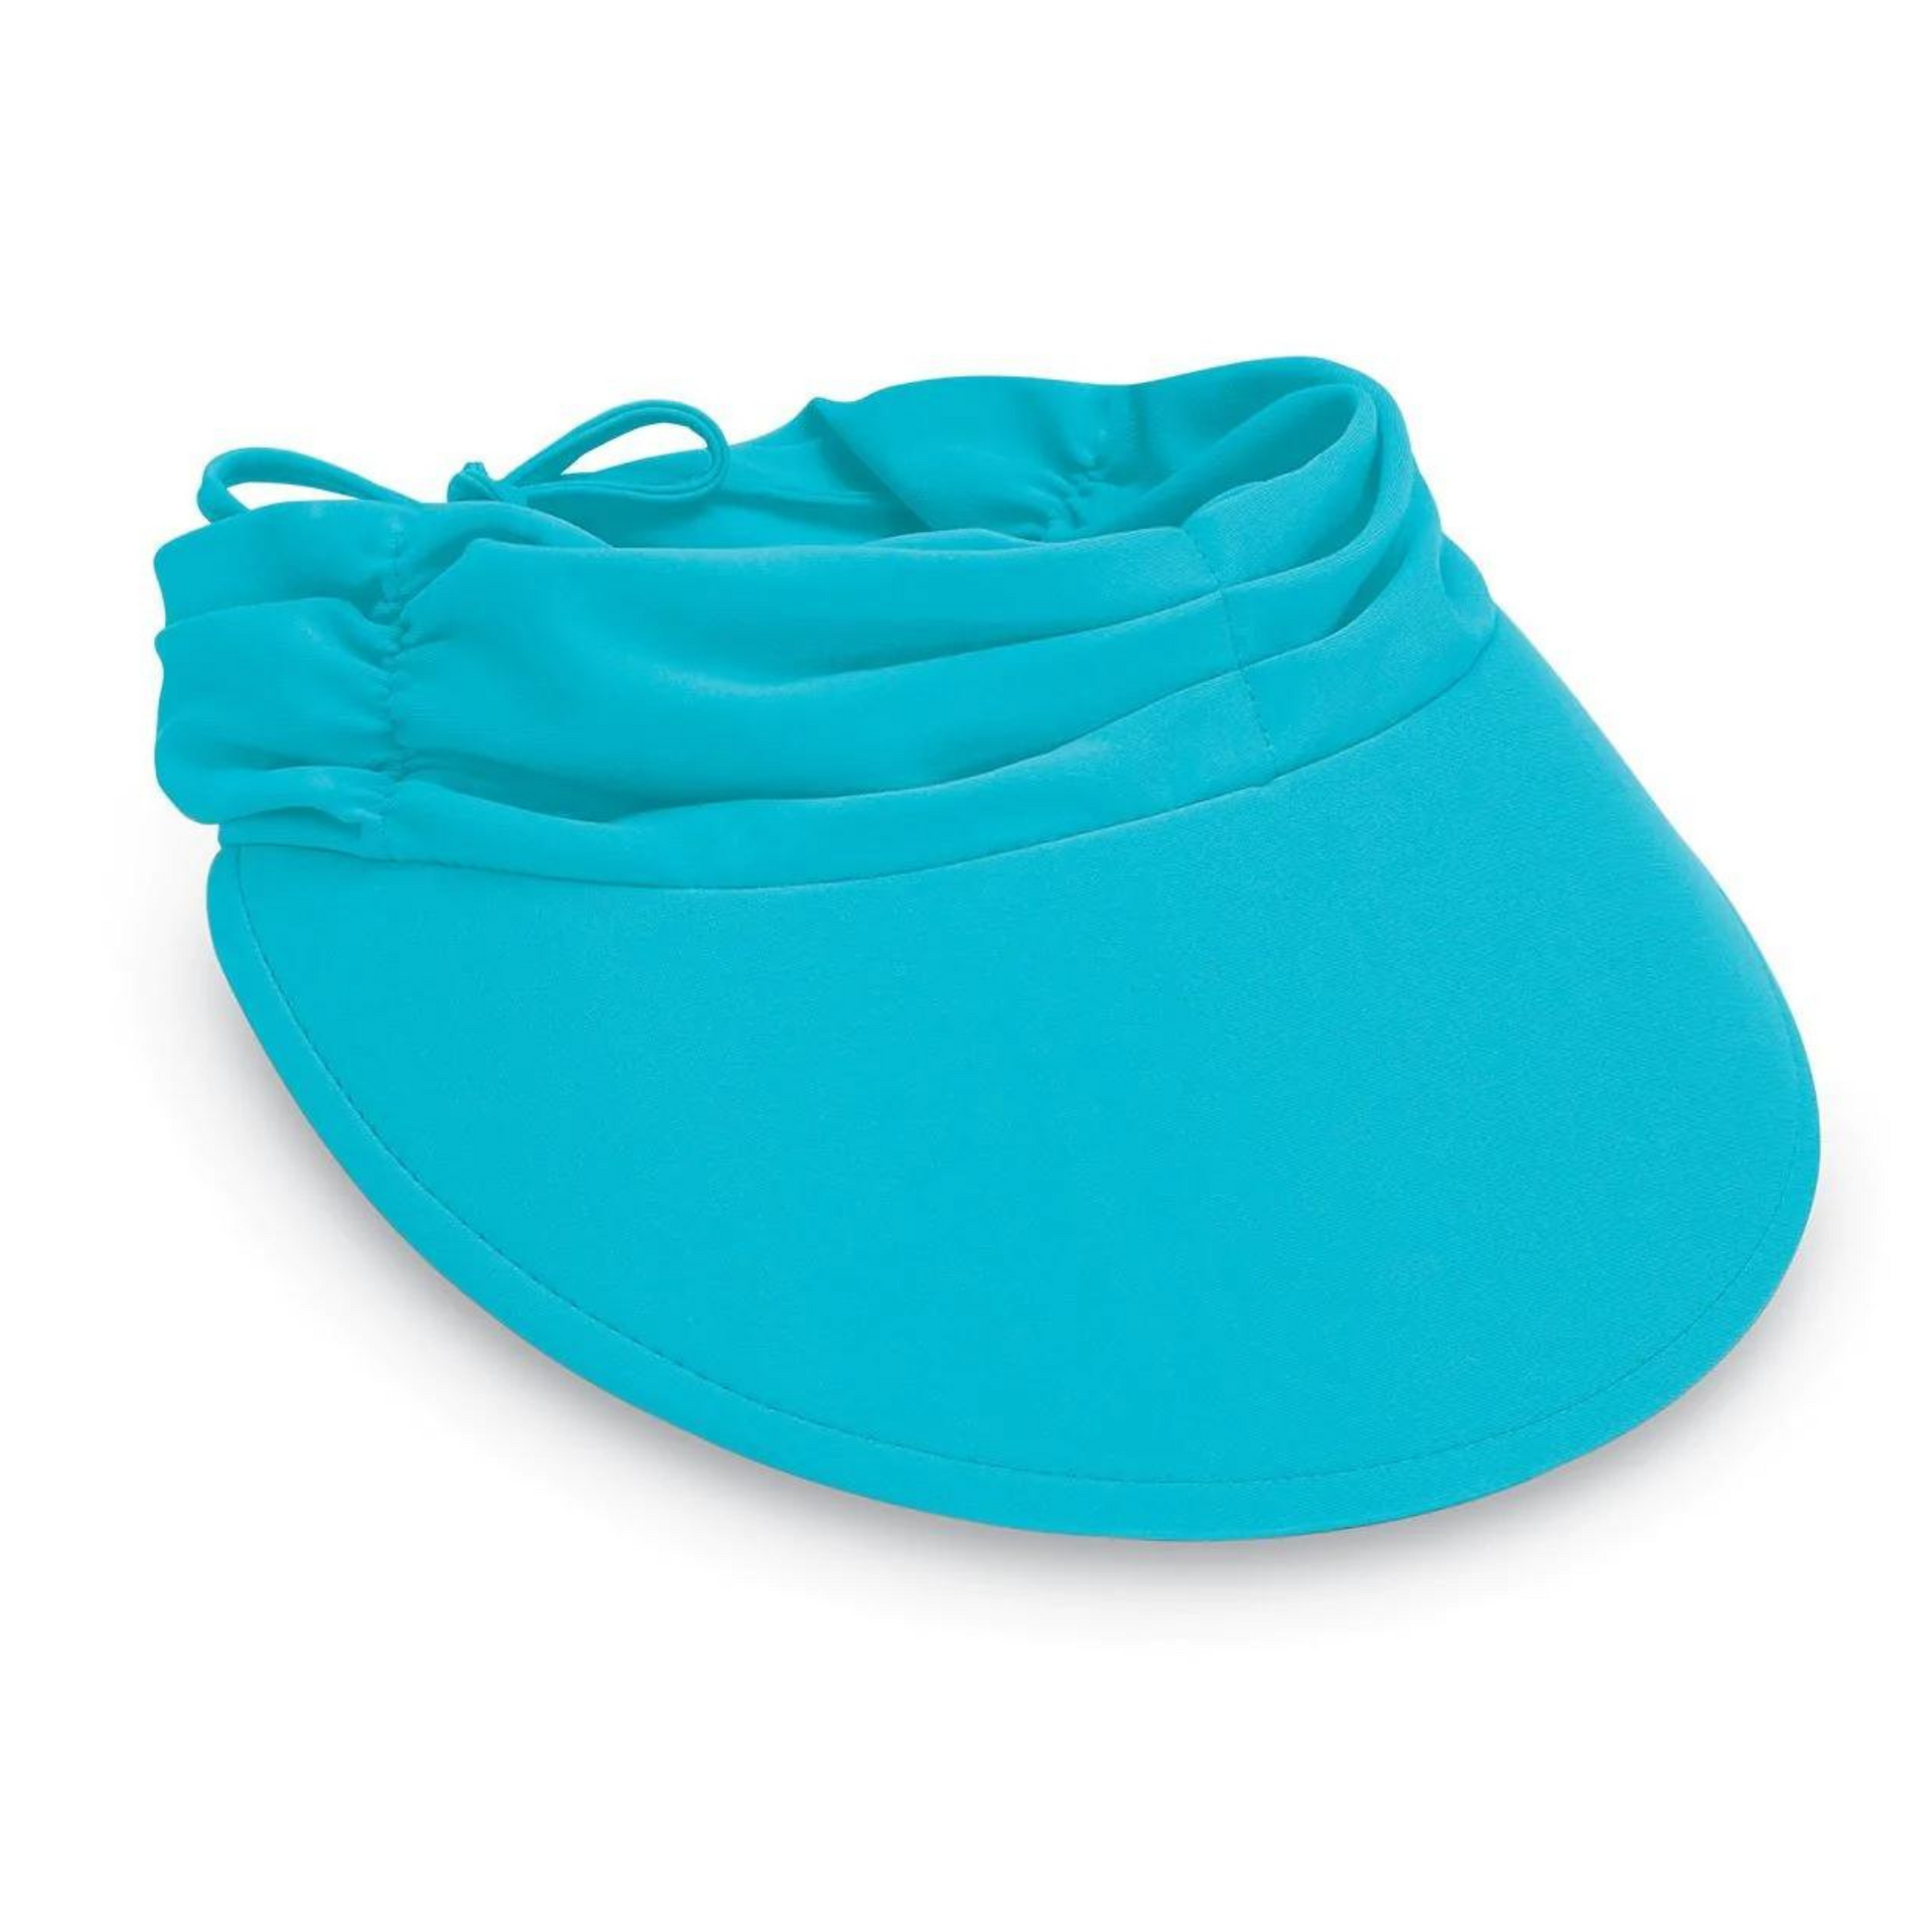 A Photo of the turquoise aqua visor, showing the brim and adjustable feature.